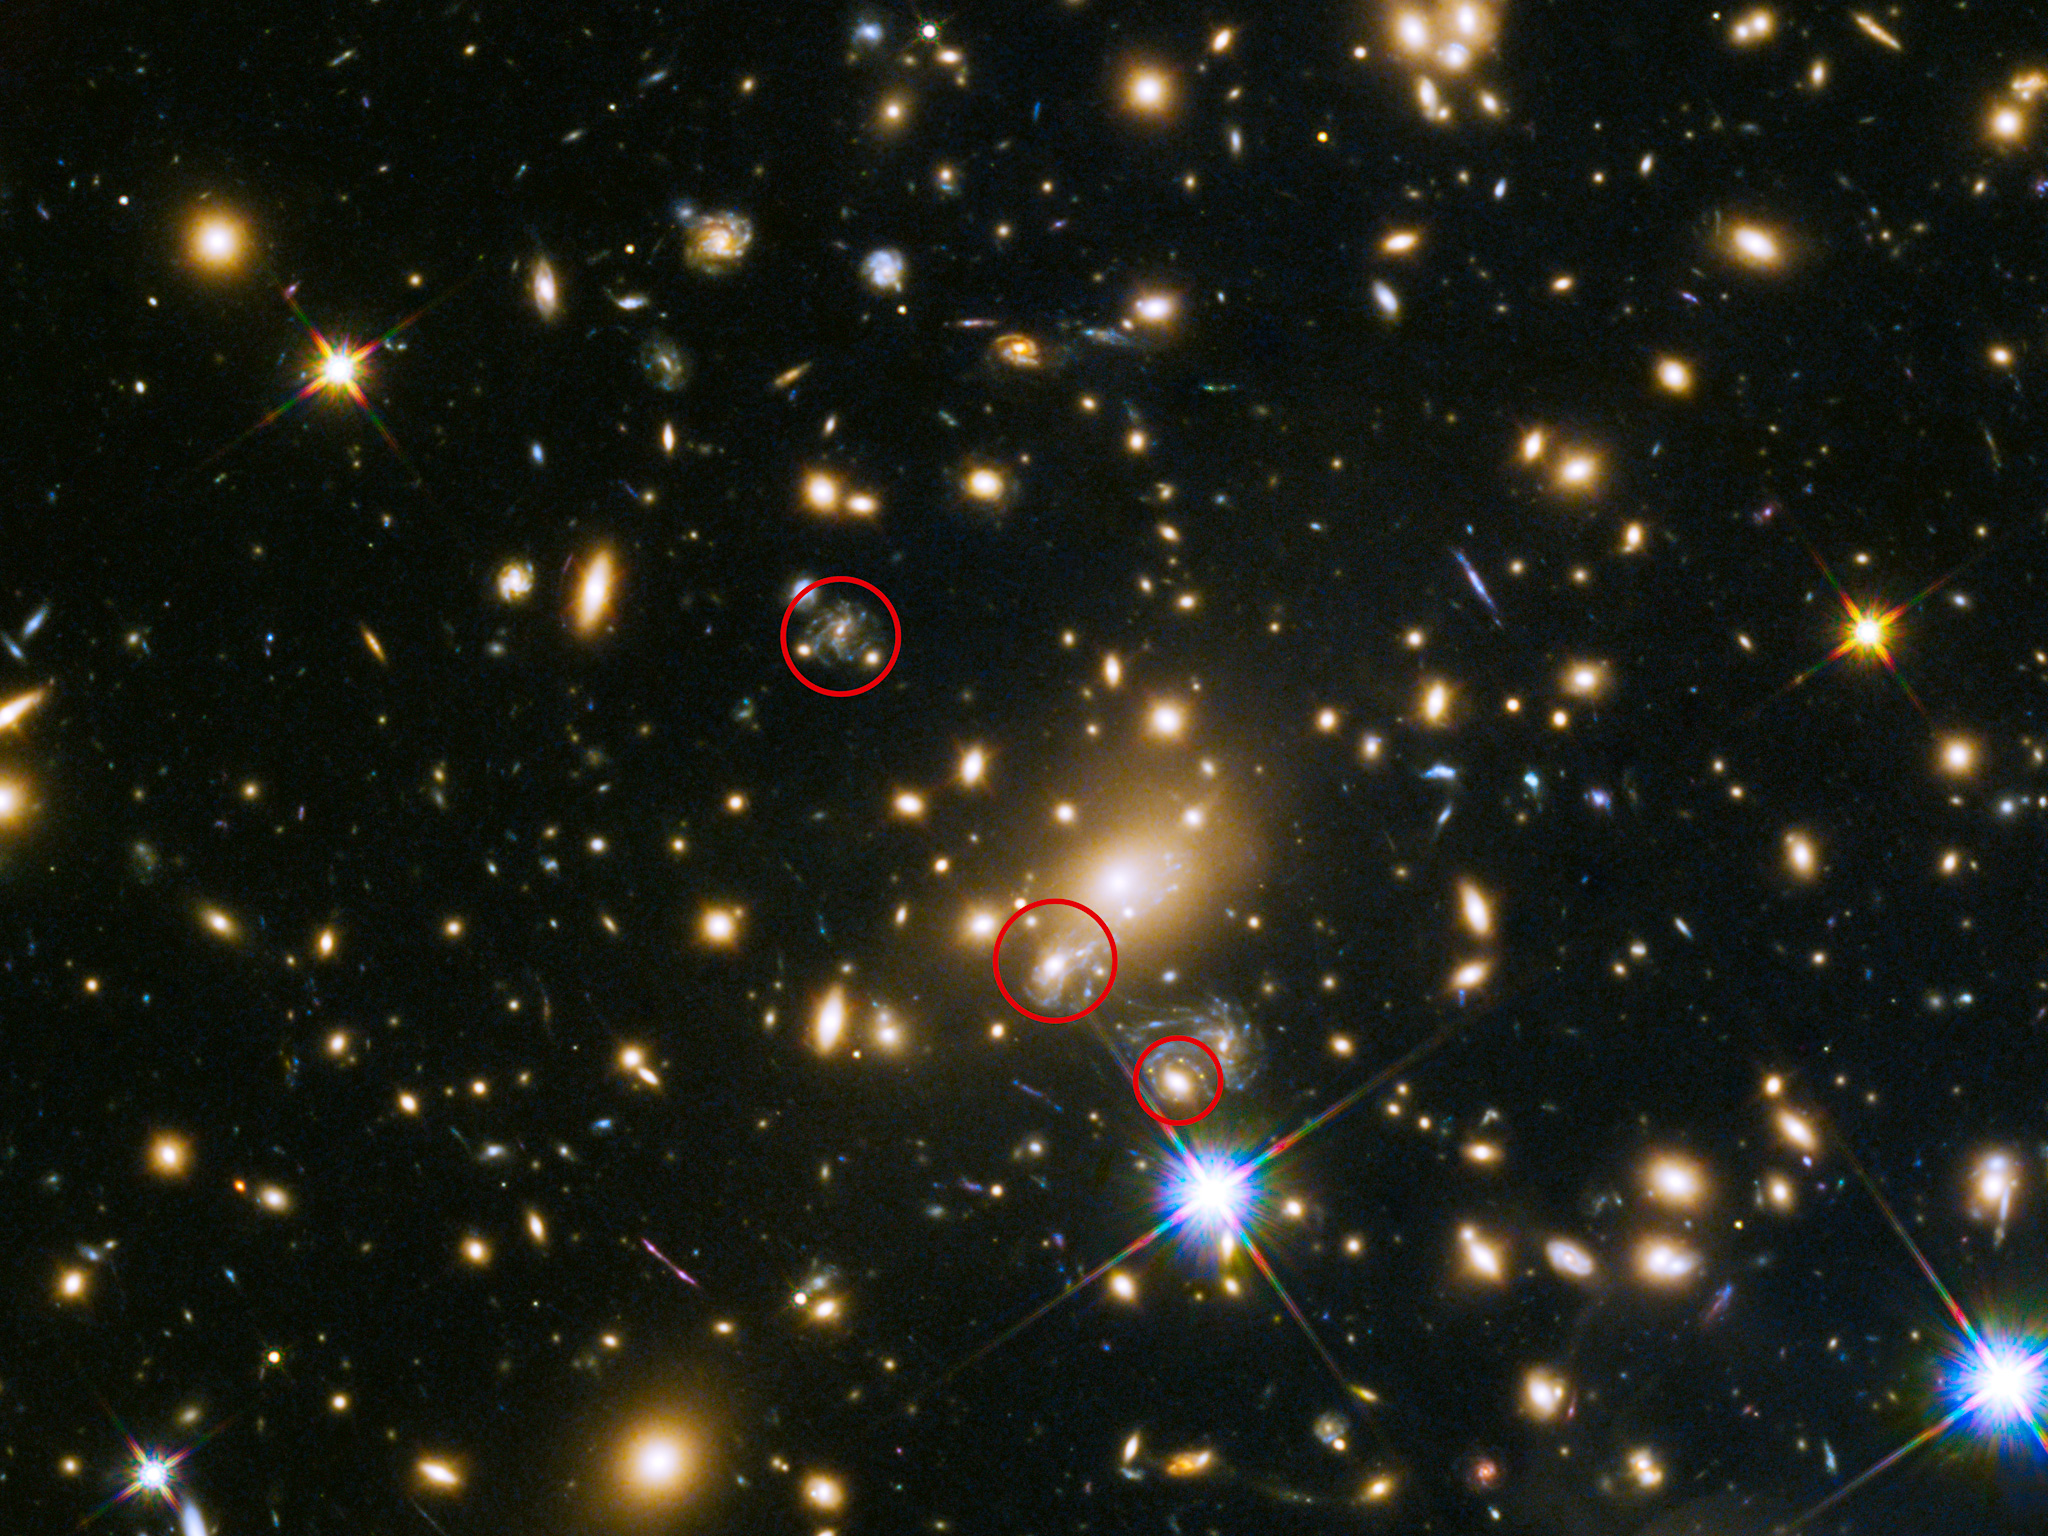 The field is filled with galaxies. One galaxy in particular is gravitationally lensed (circled in red) at least three times.